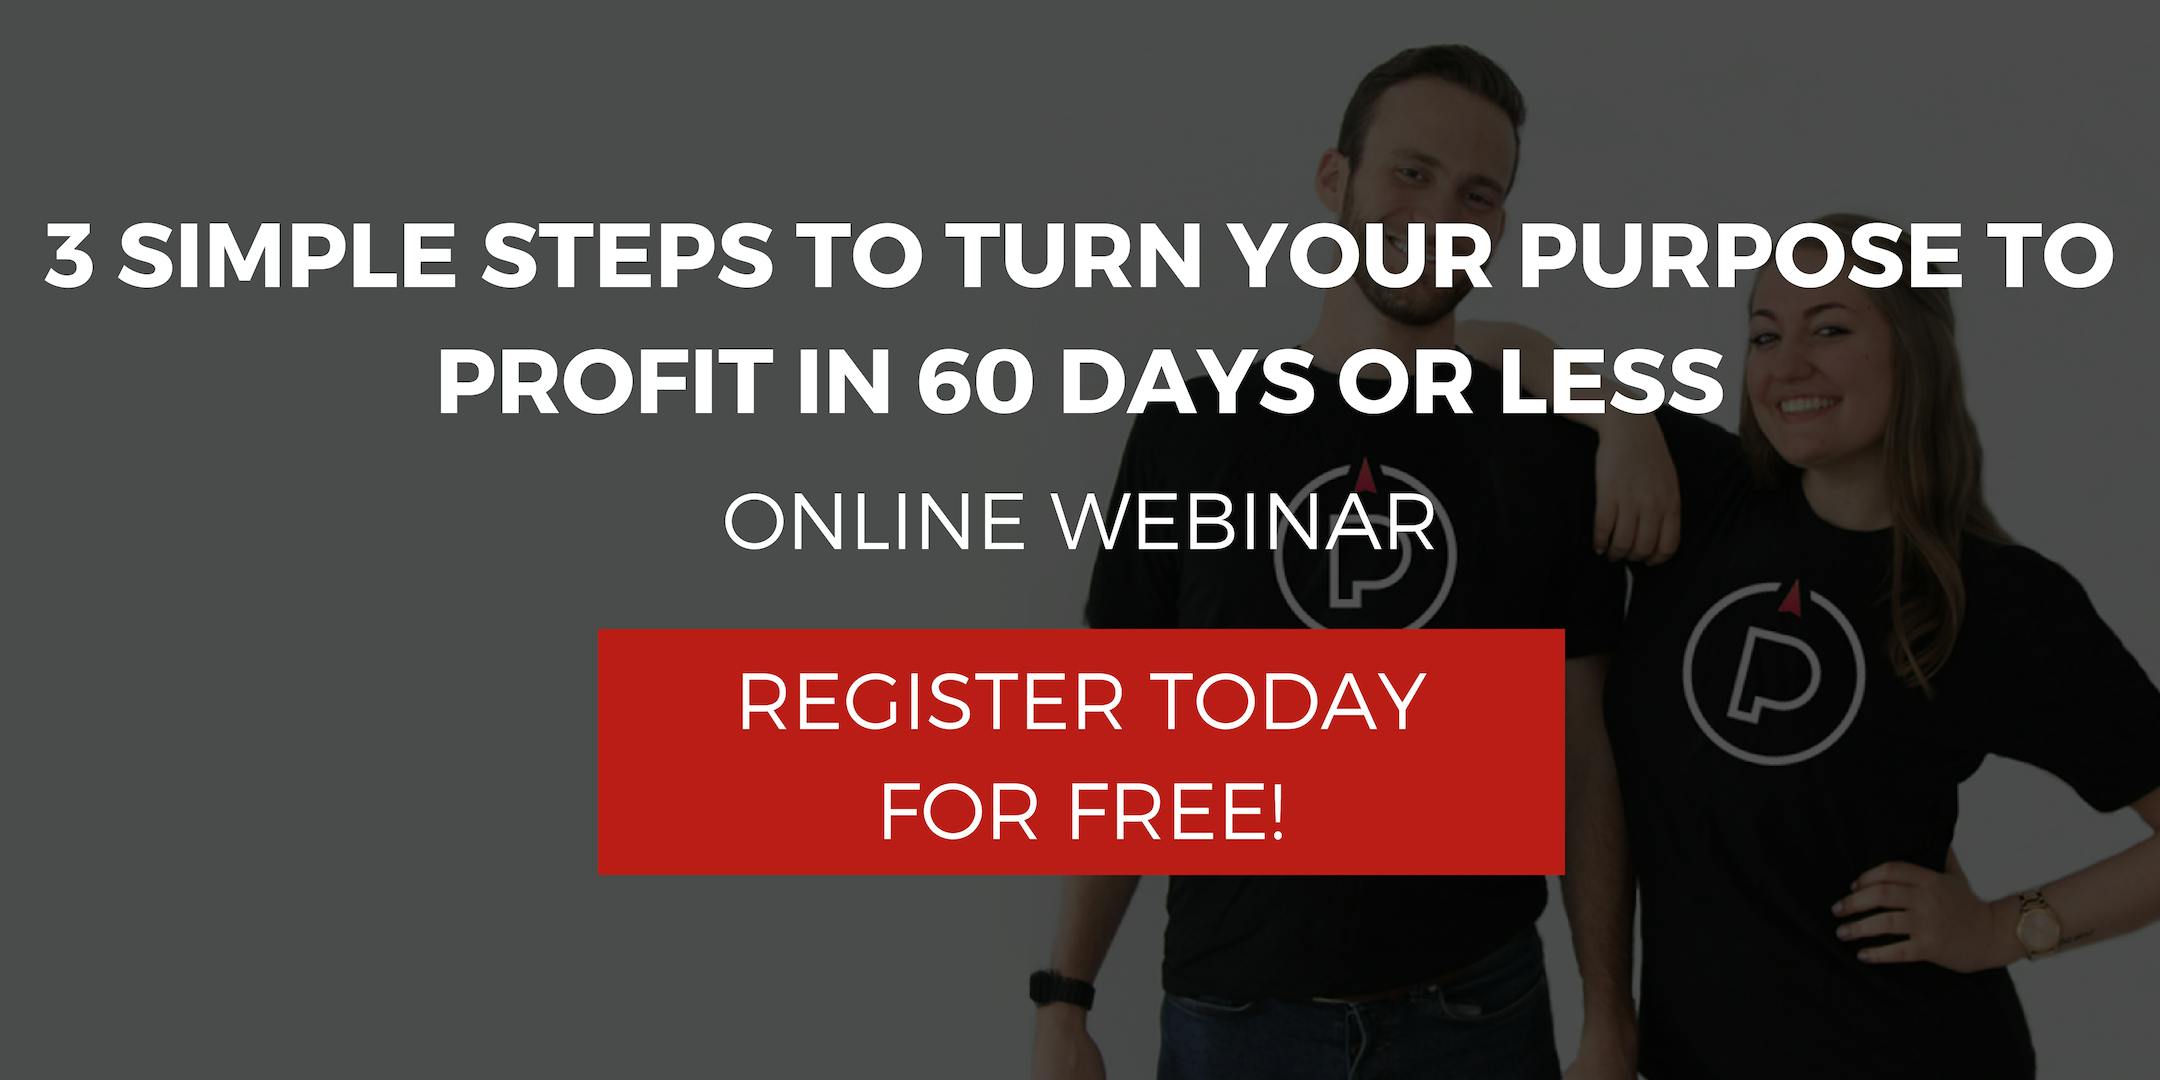 (FREE) 3 Simple Steps to Turn Your Purpose to Profit In 60 Days or Less